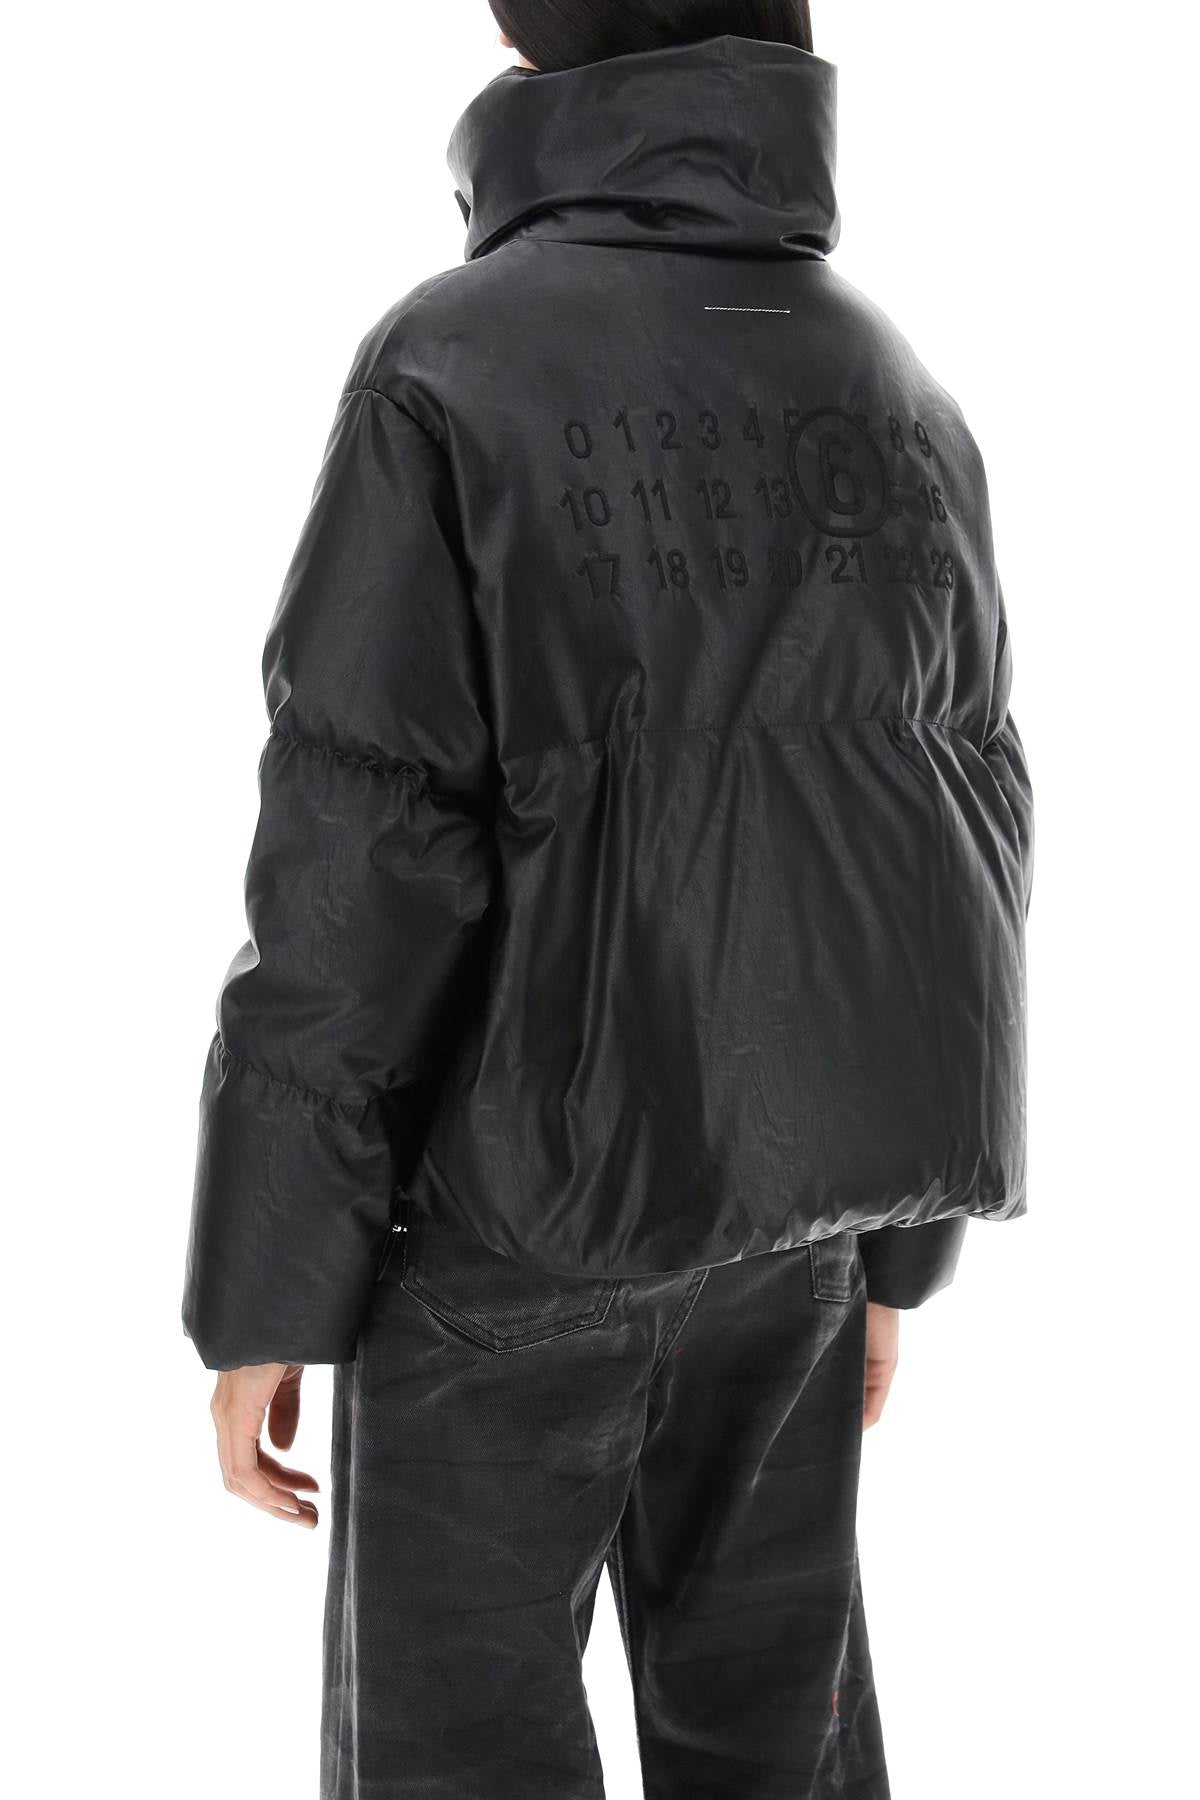 Mm6 maison margiela faux leather puffer jacket with back logo embroidery-2